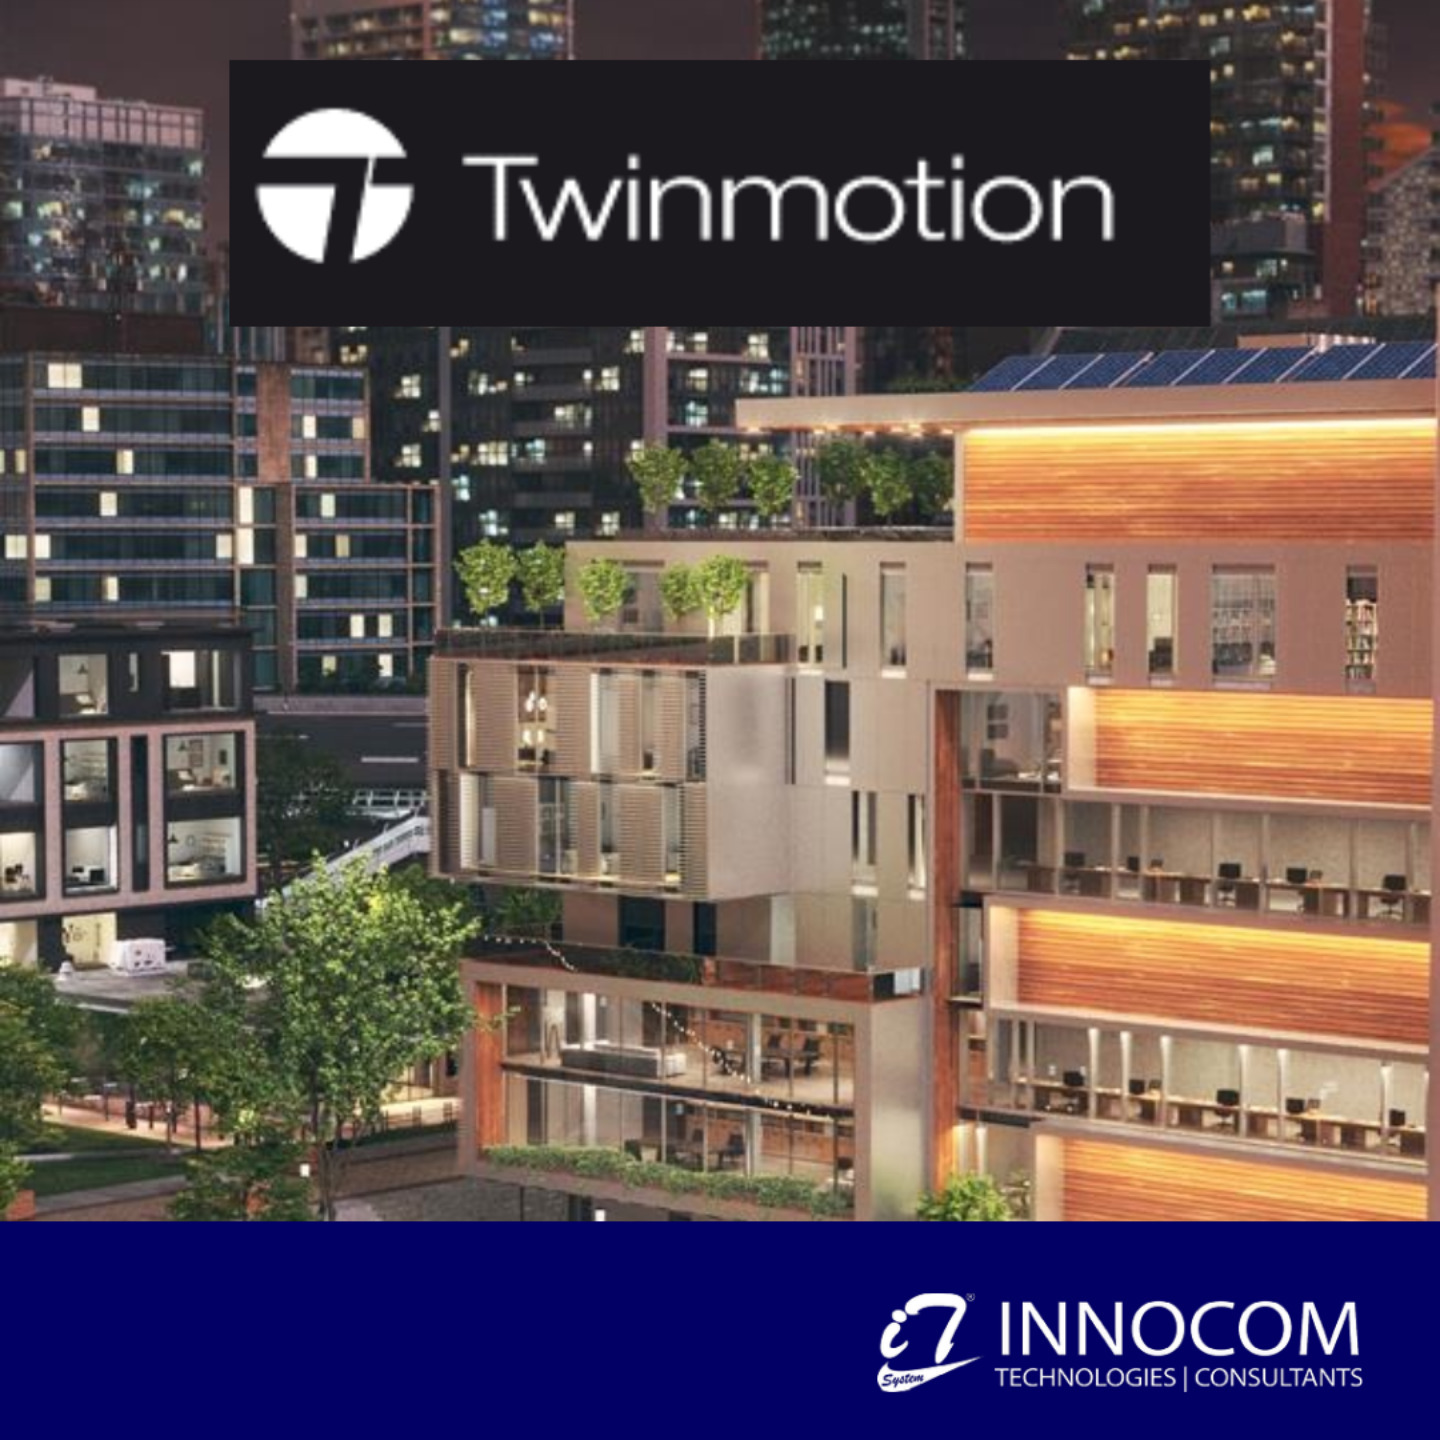 TWINMOTION FOR CONSTRUCTION SIMULATION/ VISUALIZATION IN REAL-TIME